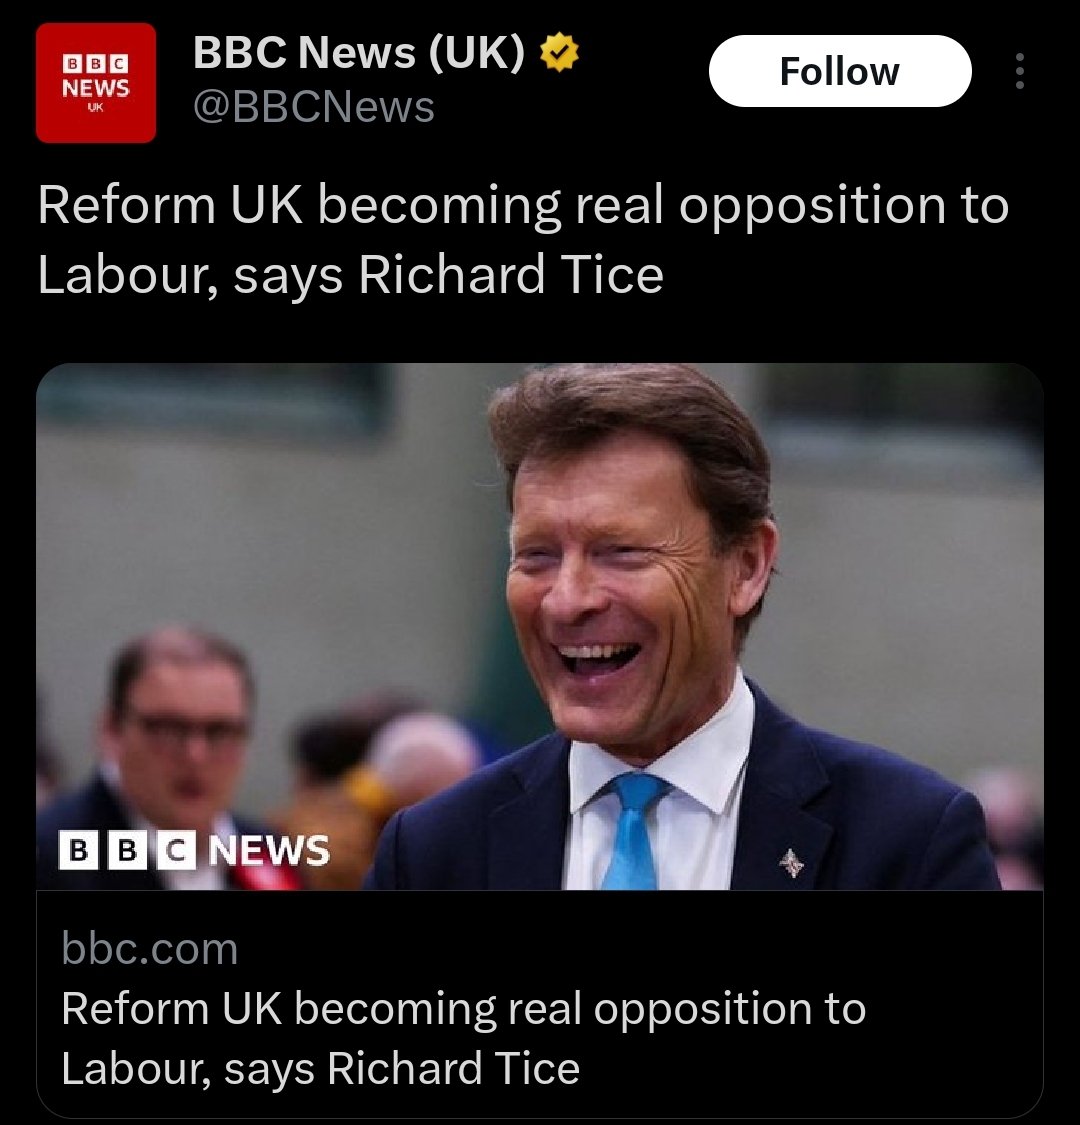 The BBC, man. Tice won fuck all, but still they rush to plaster his face all over the news.